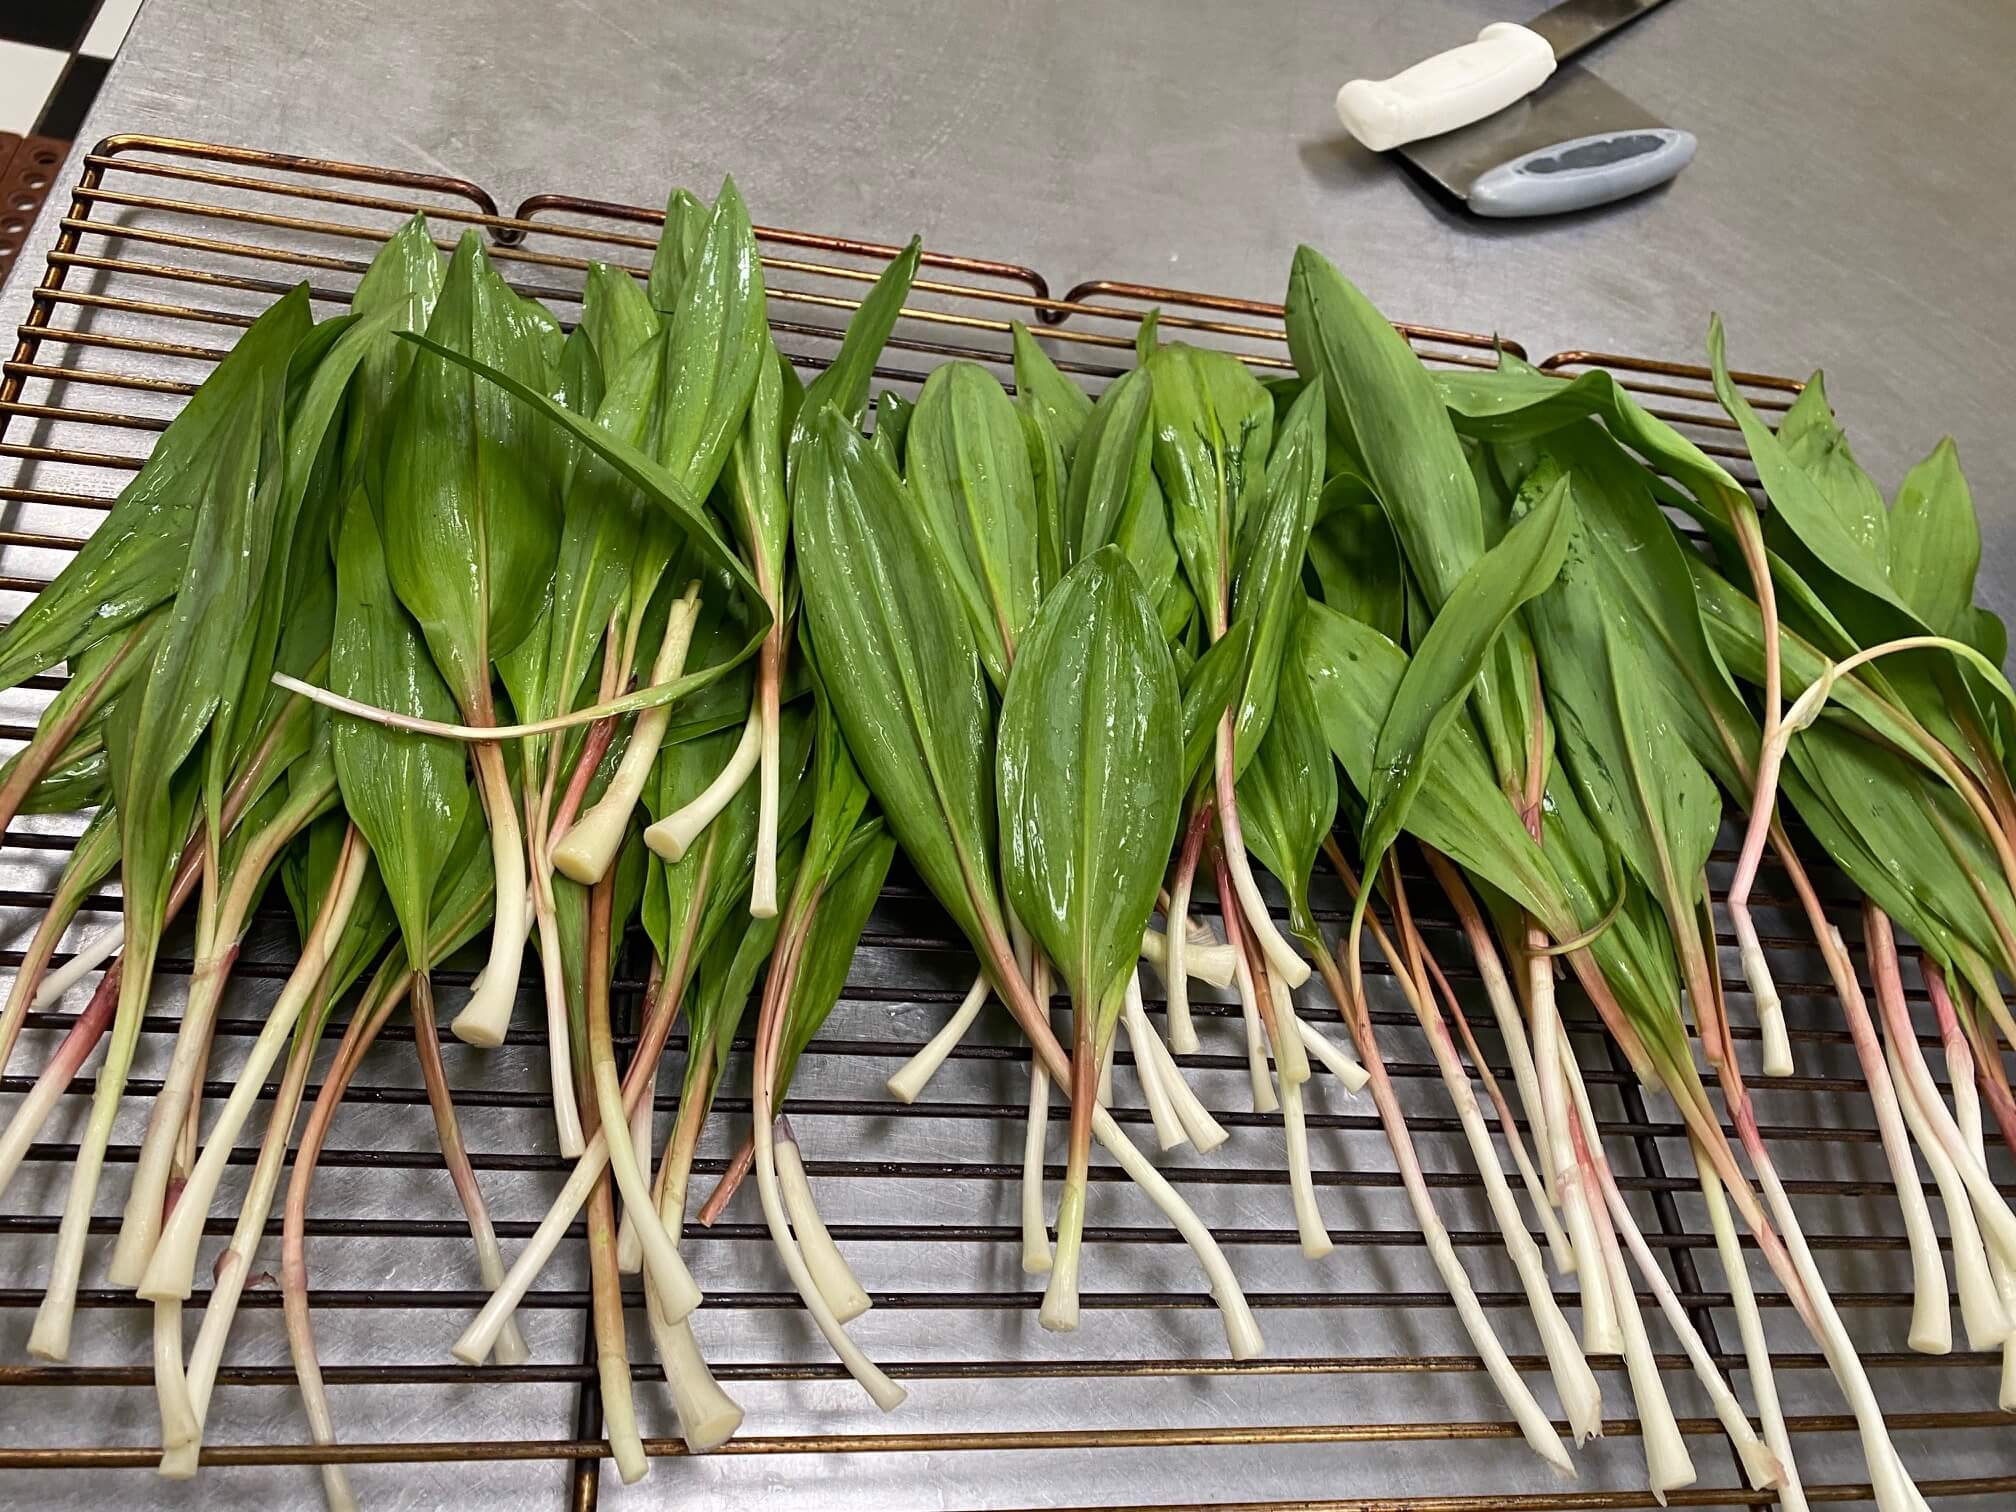 Ramps, or green, wild onions on the kitchen counter ready for cooking